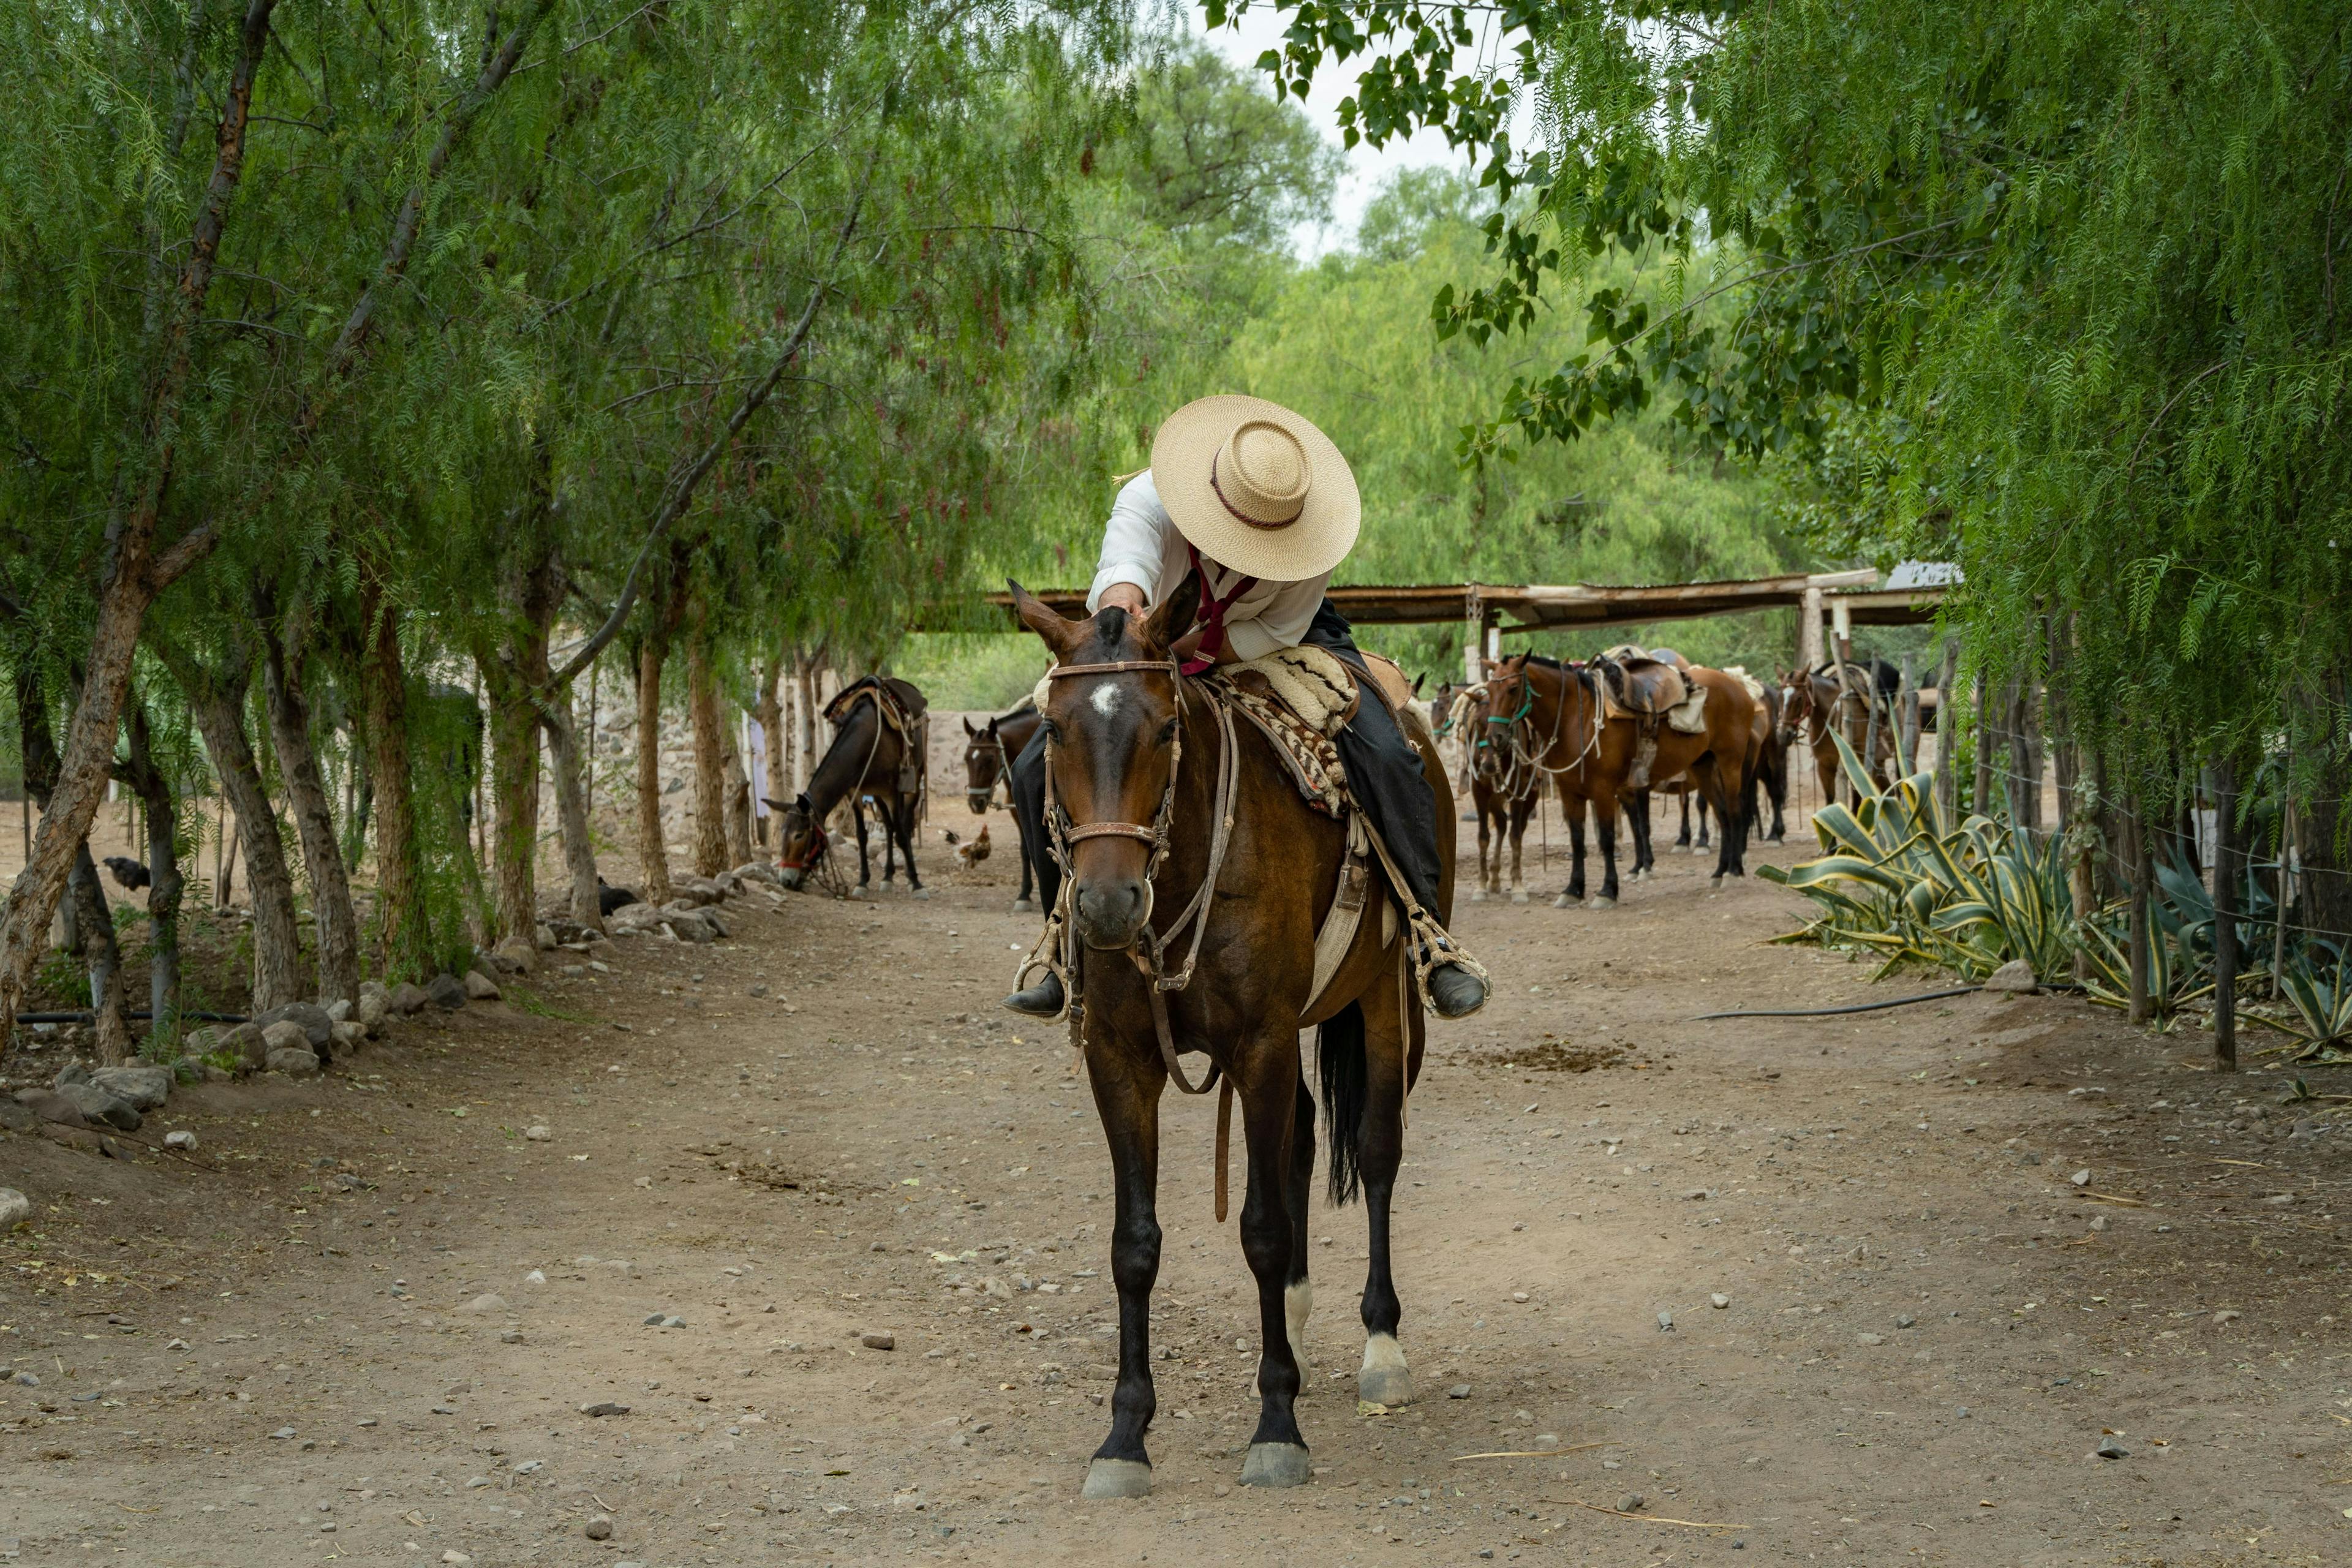 Gaucho with a horse in Argentina.